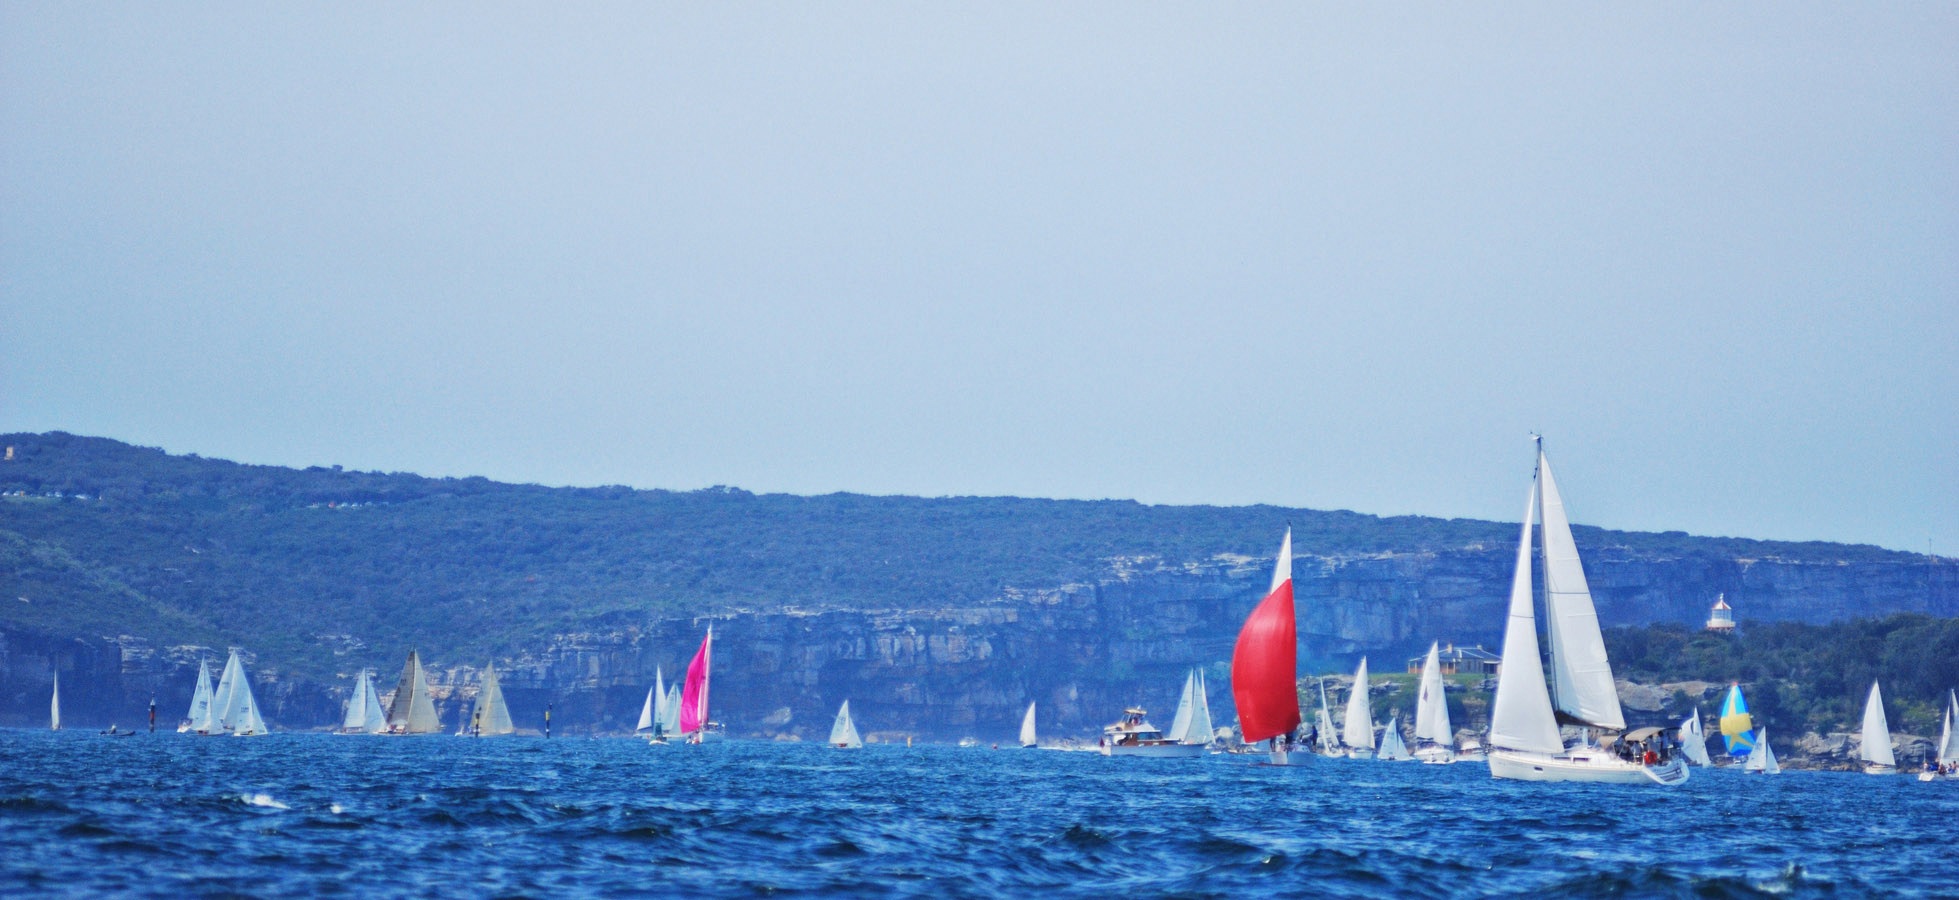 Panorama view of boats racing on Sydney Harbour photography by Kent Johnson